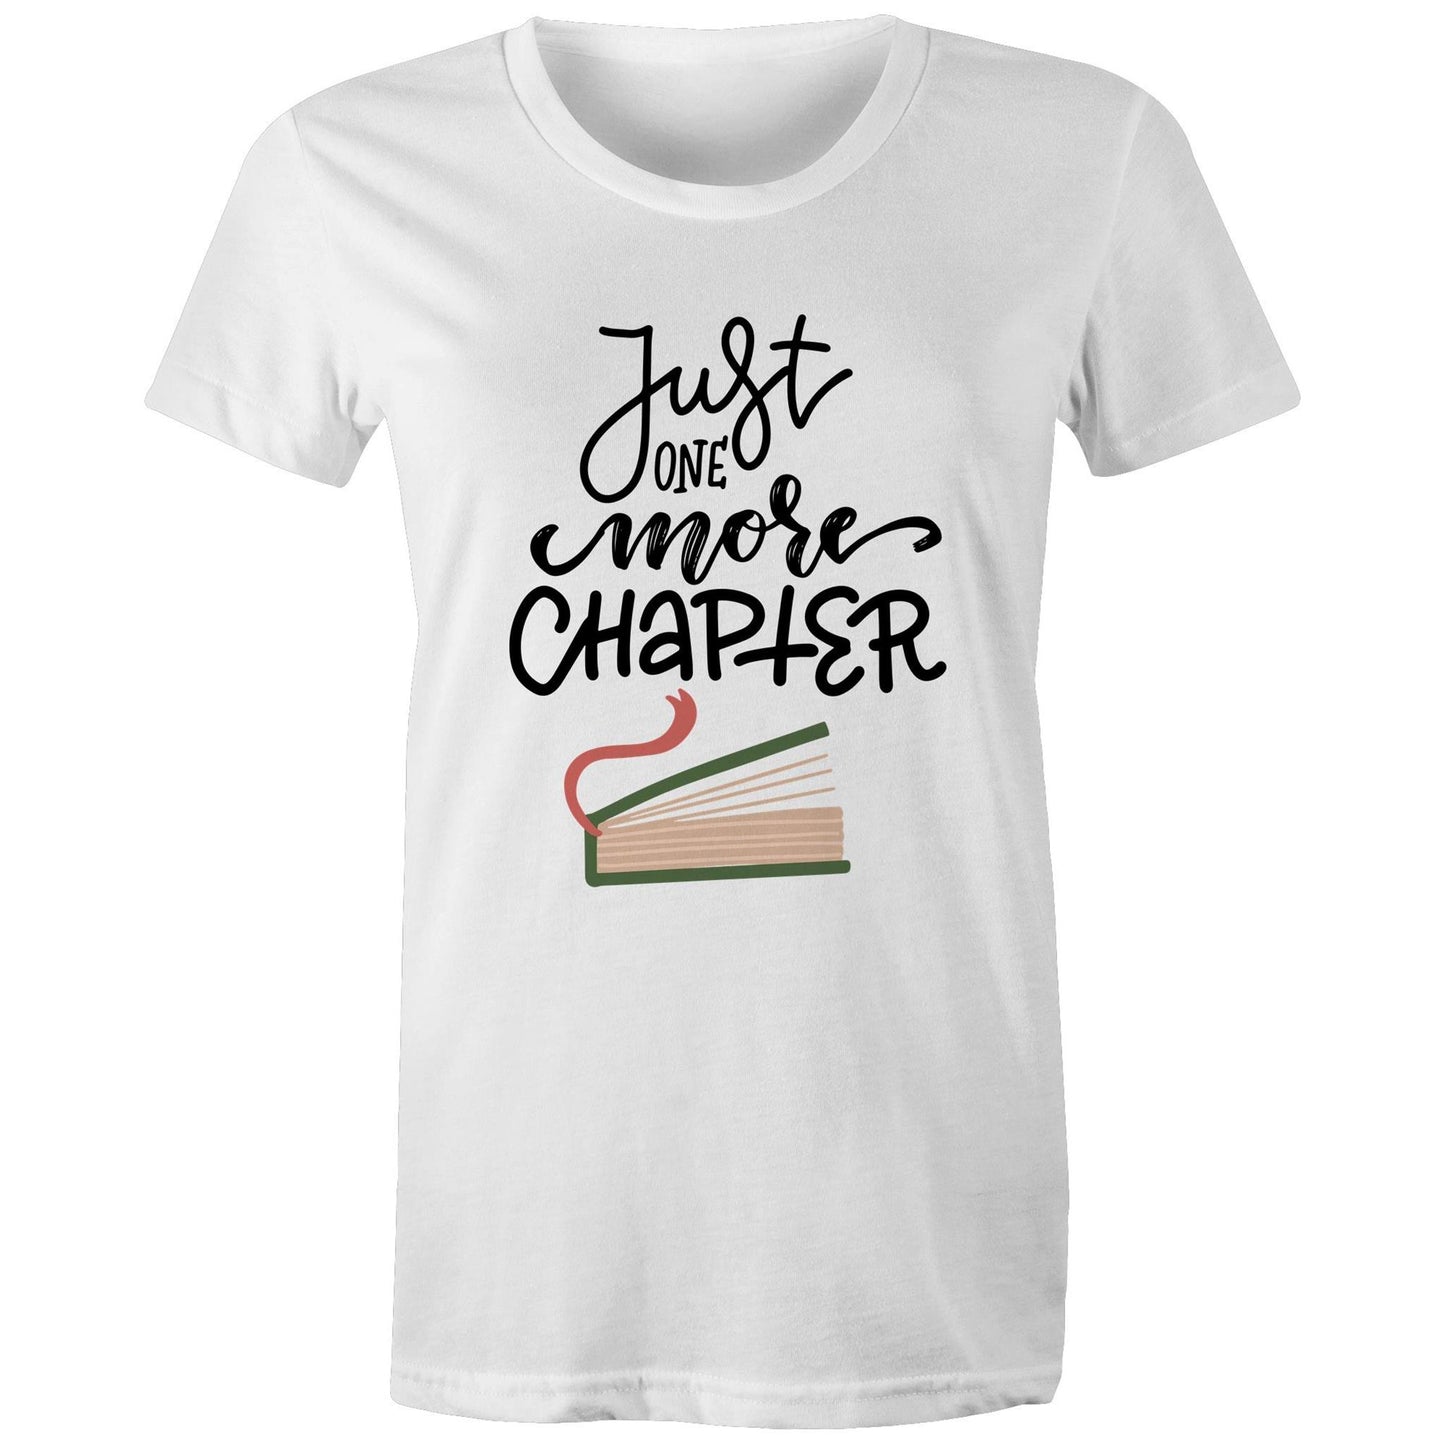 Just One More Chapter - Womens T-shirt White Womens T-shirt Reading